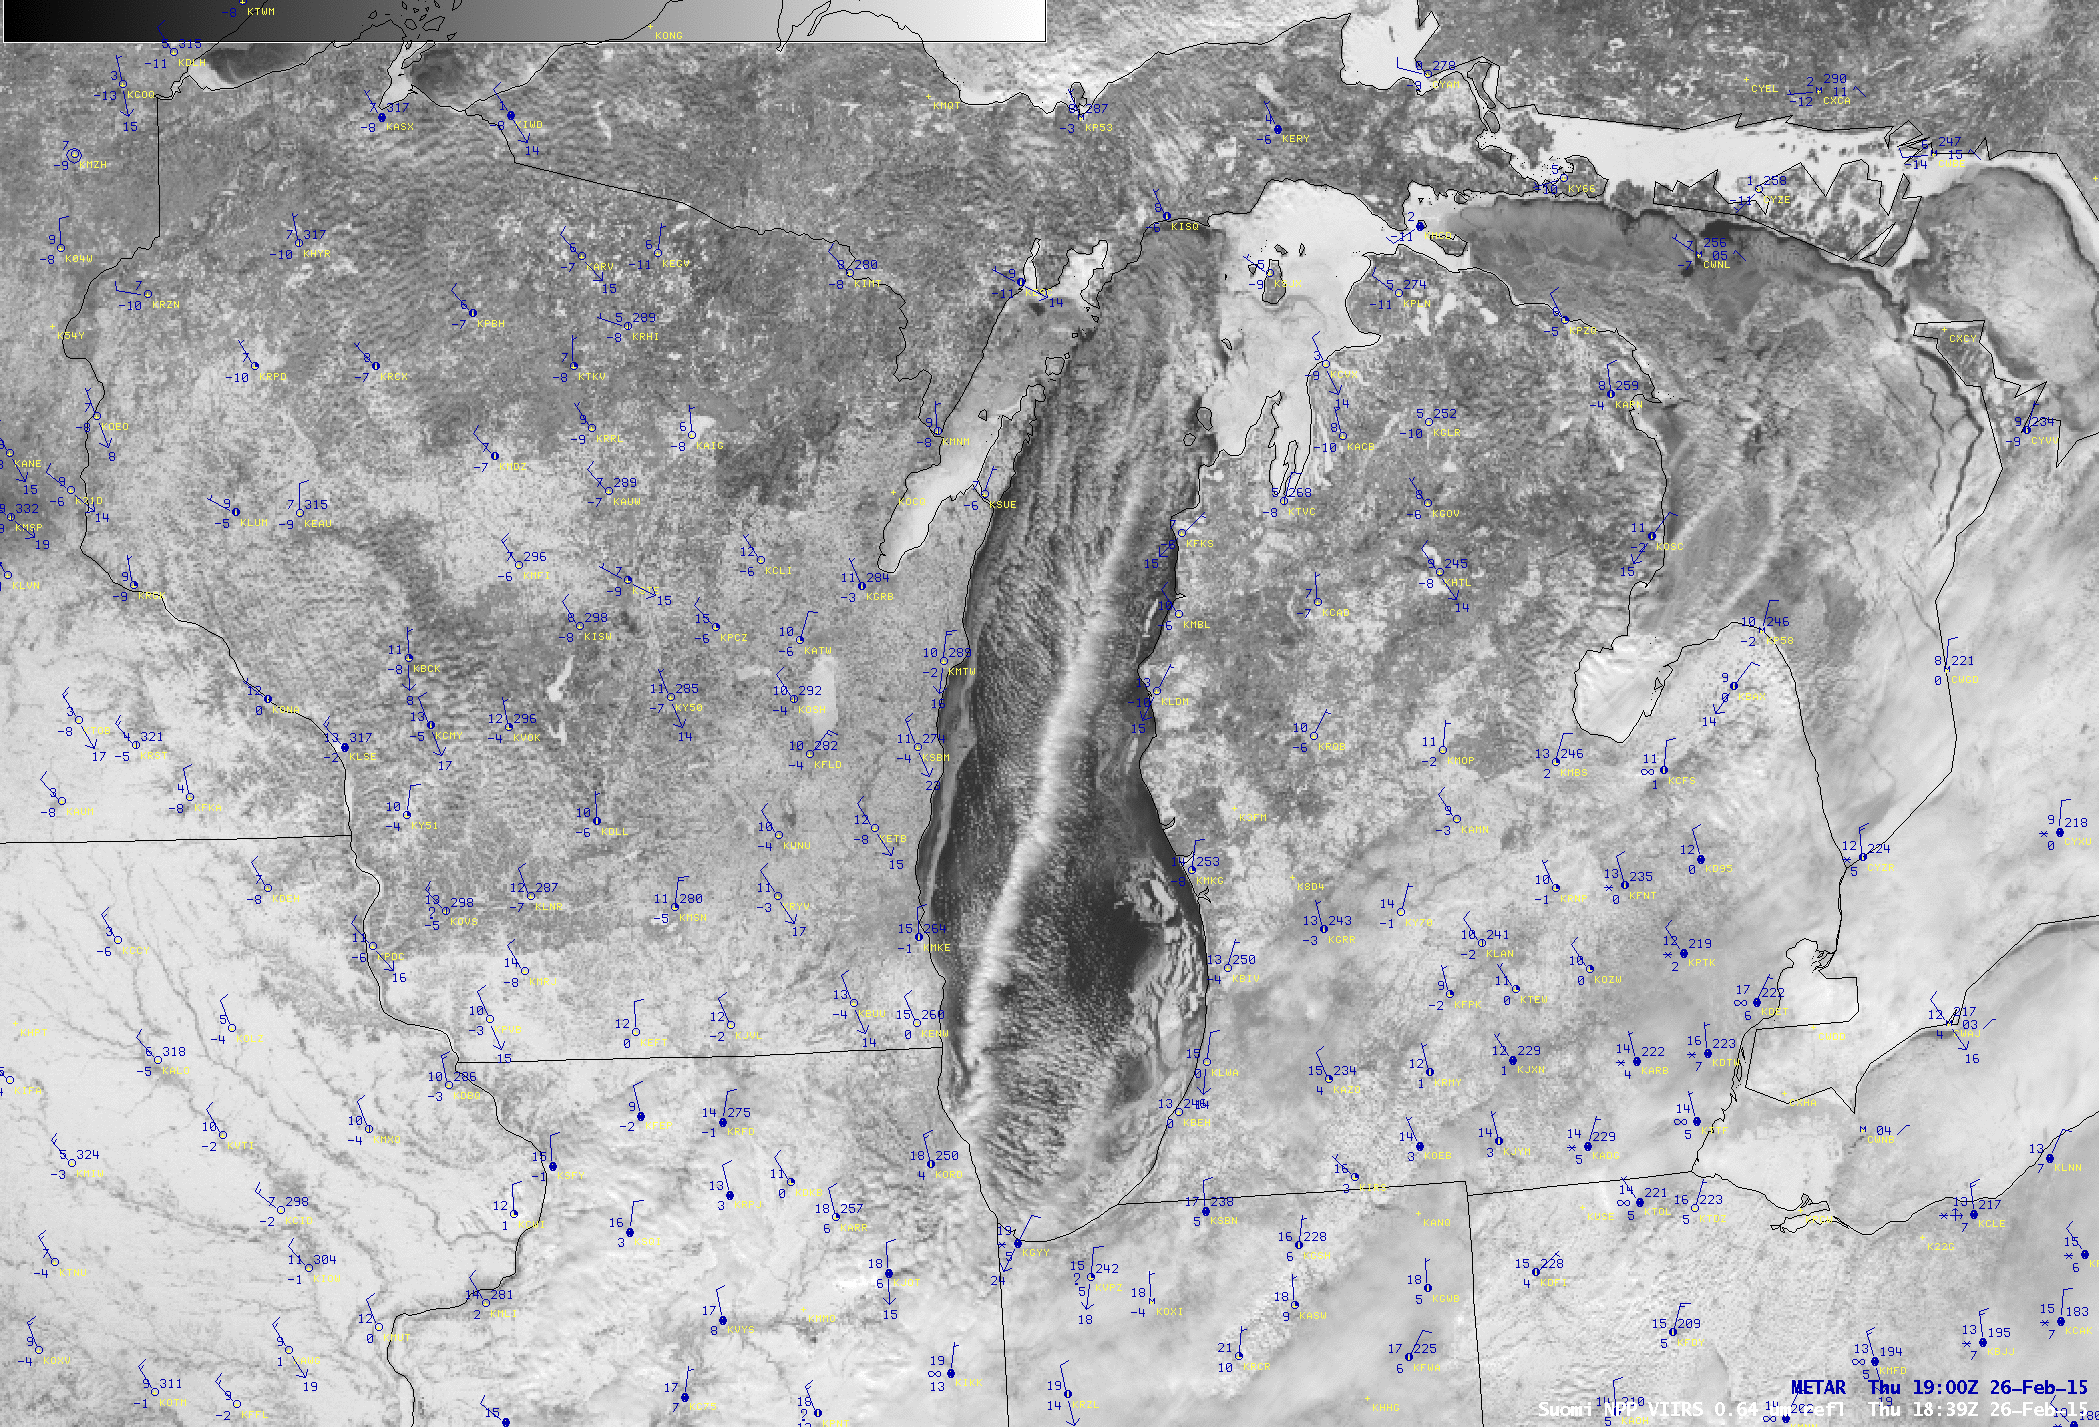 Suomi NPP VIIRS 0.64 µm visible channel and False-color RGB image (click to enlarge)